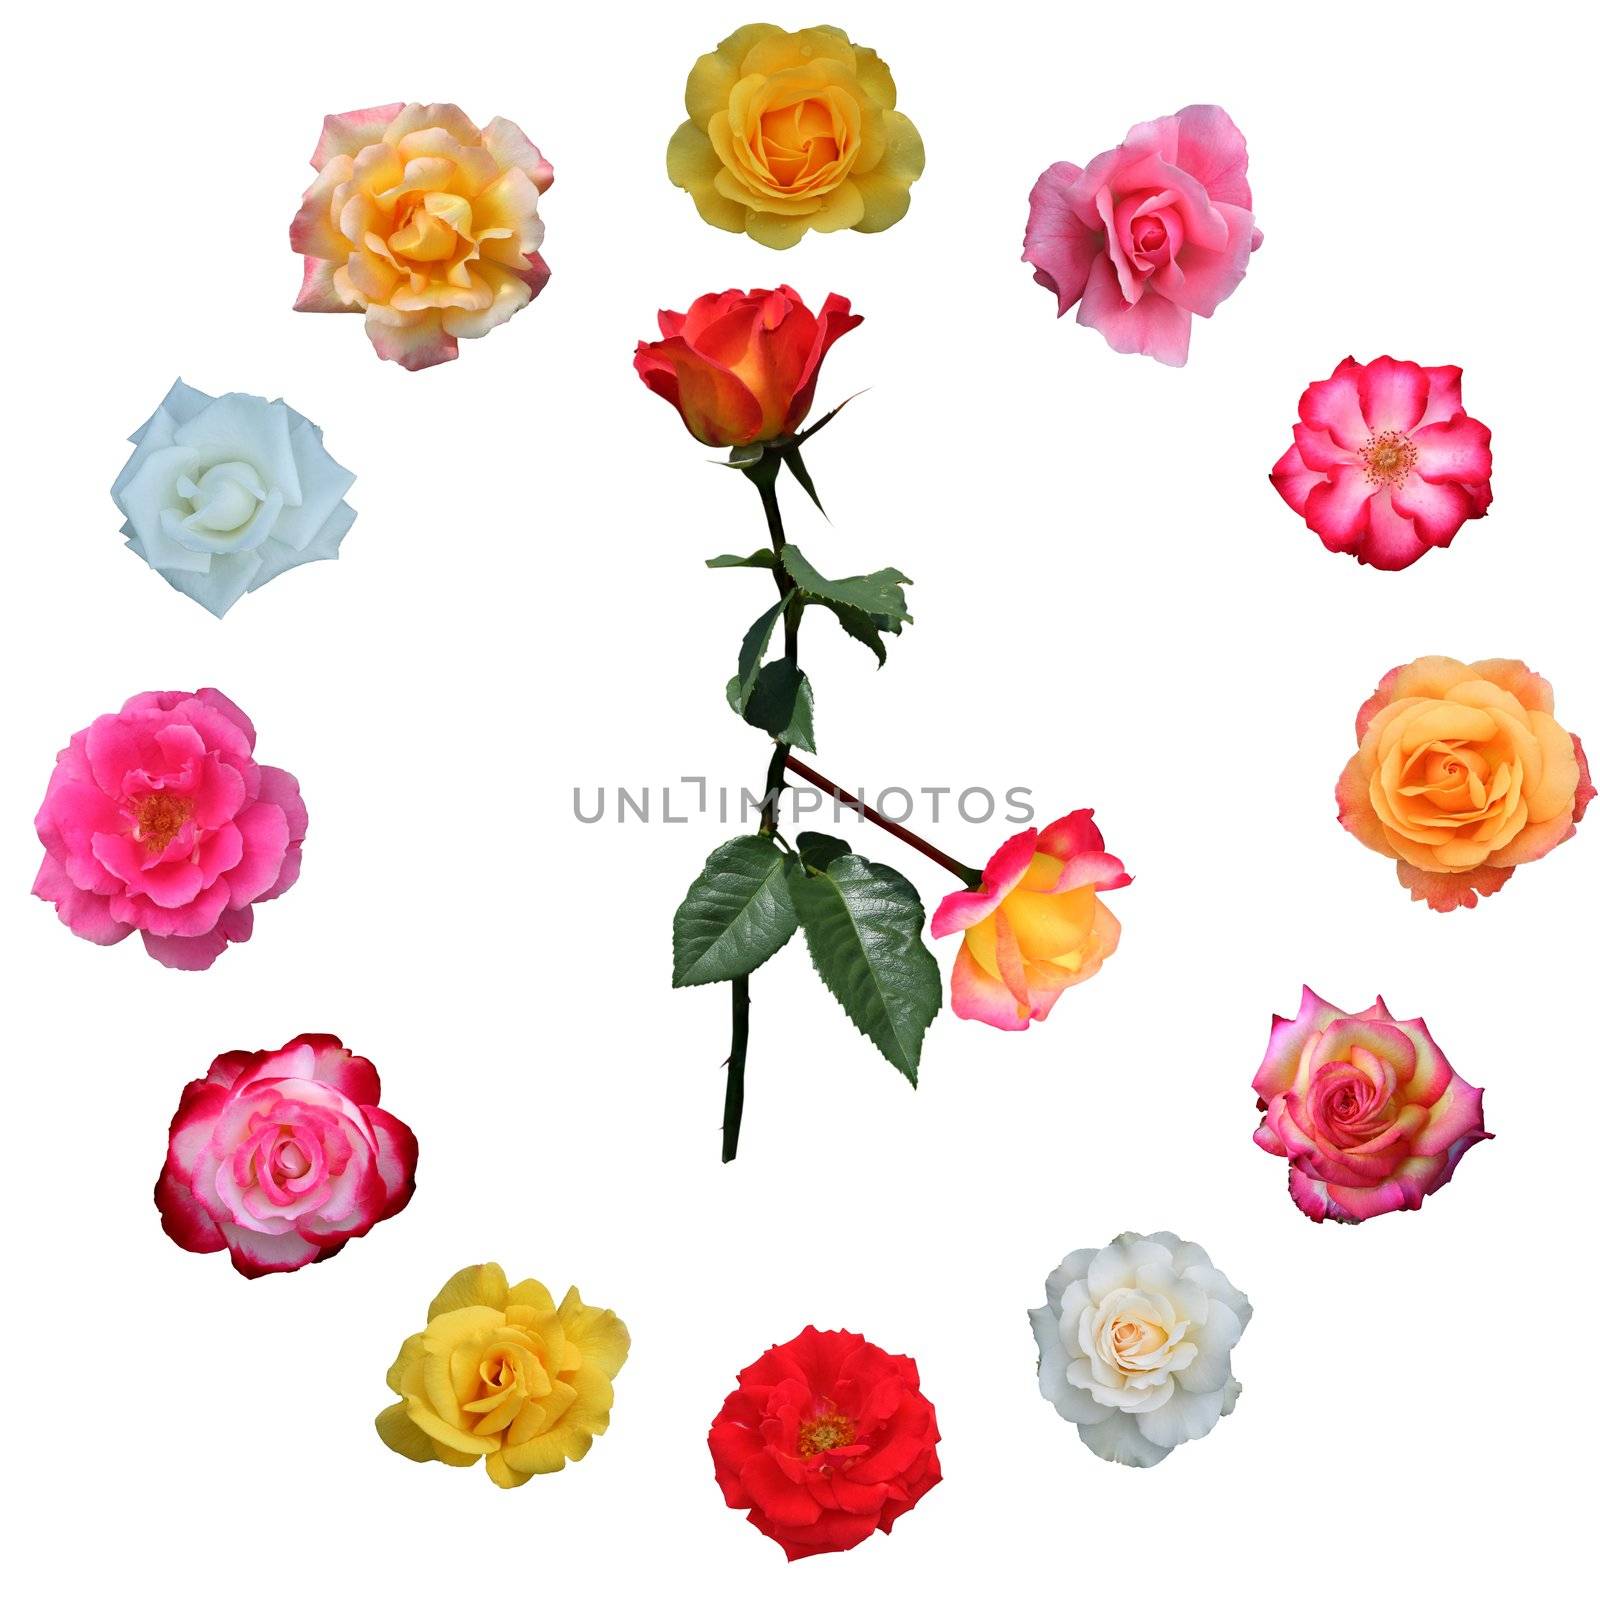 Clock face made of roses, with hands set at 4 o' clock on white background